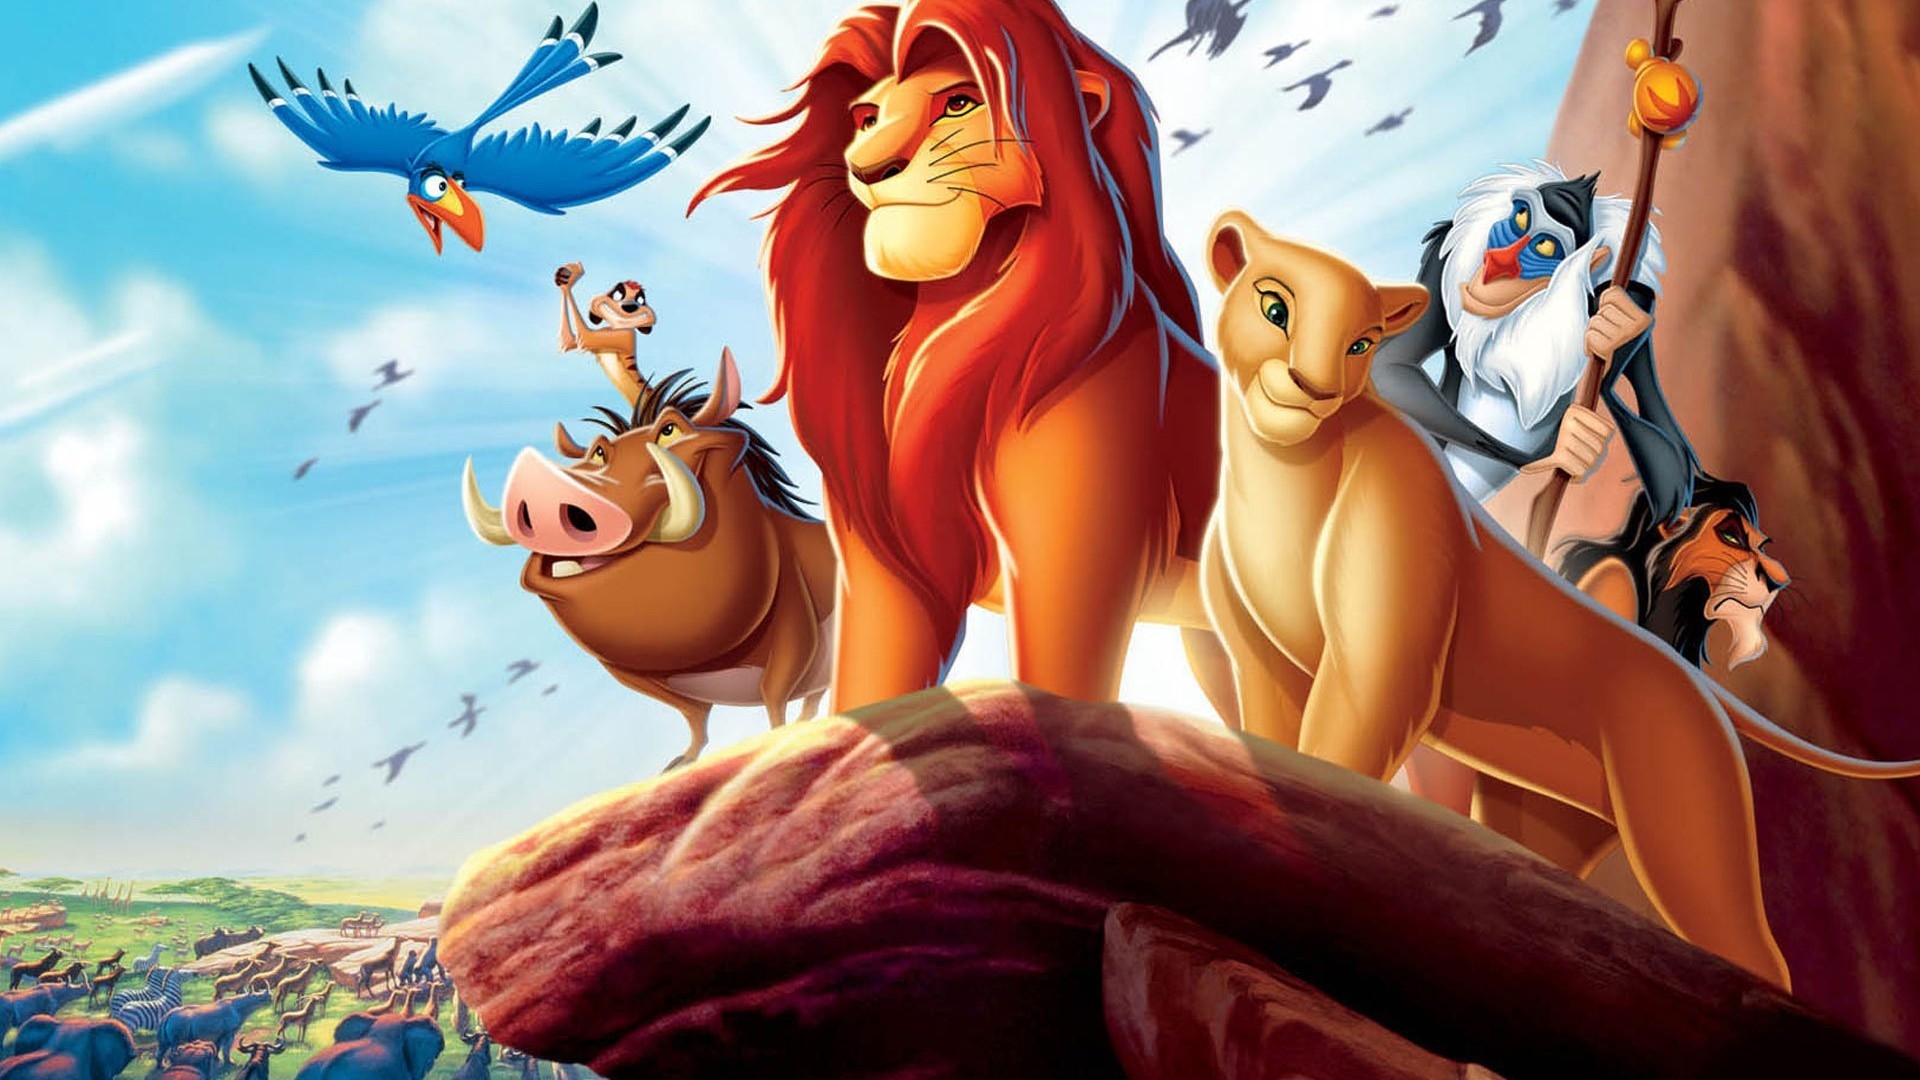 The Lion King Movie Poster for 1920 x 1080 HDTV 1080p resolution